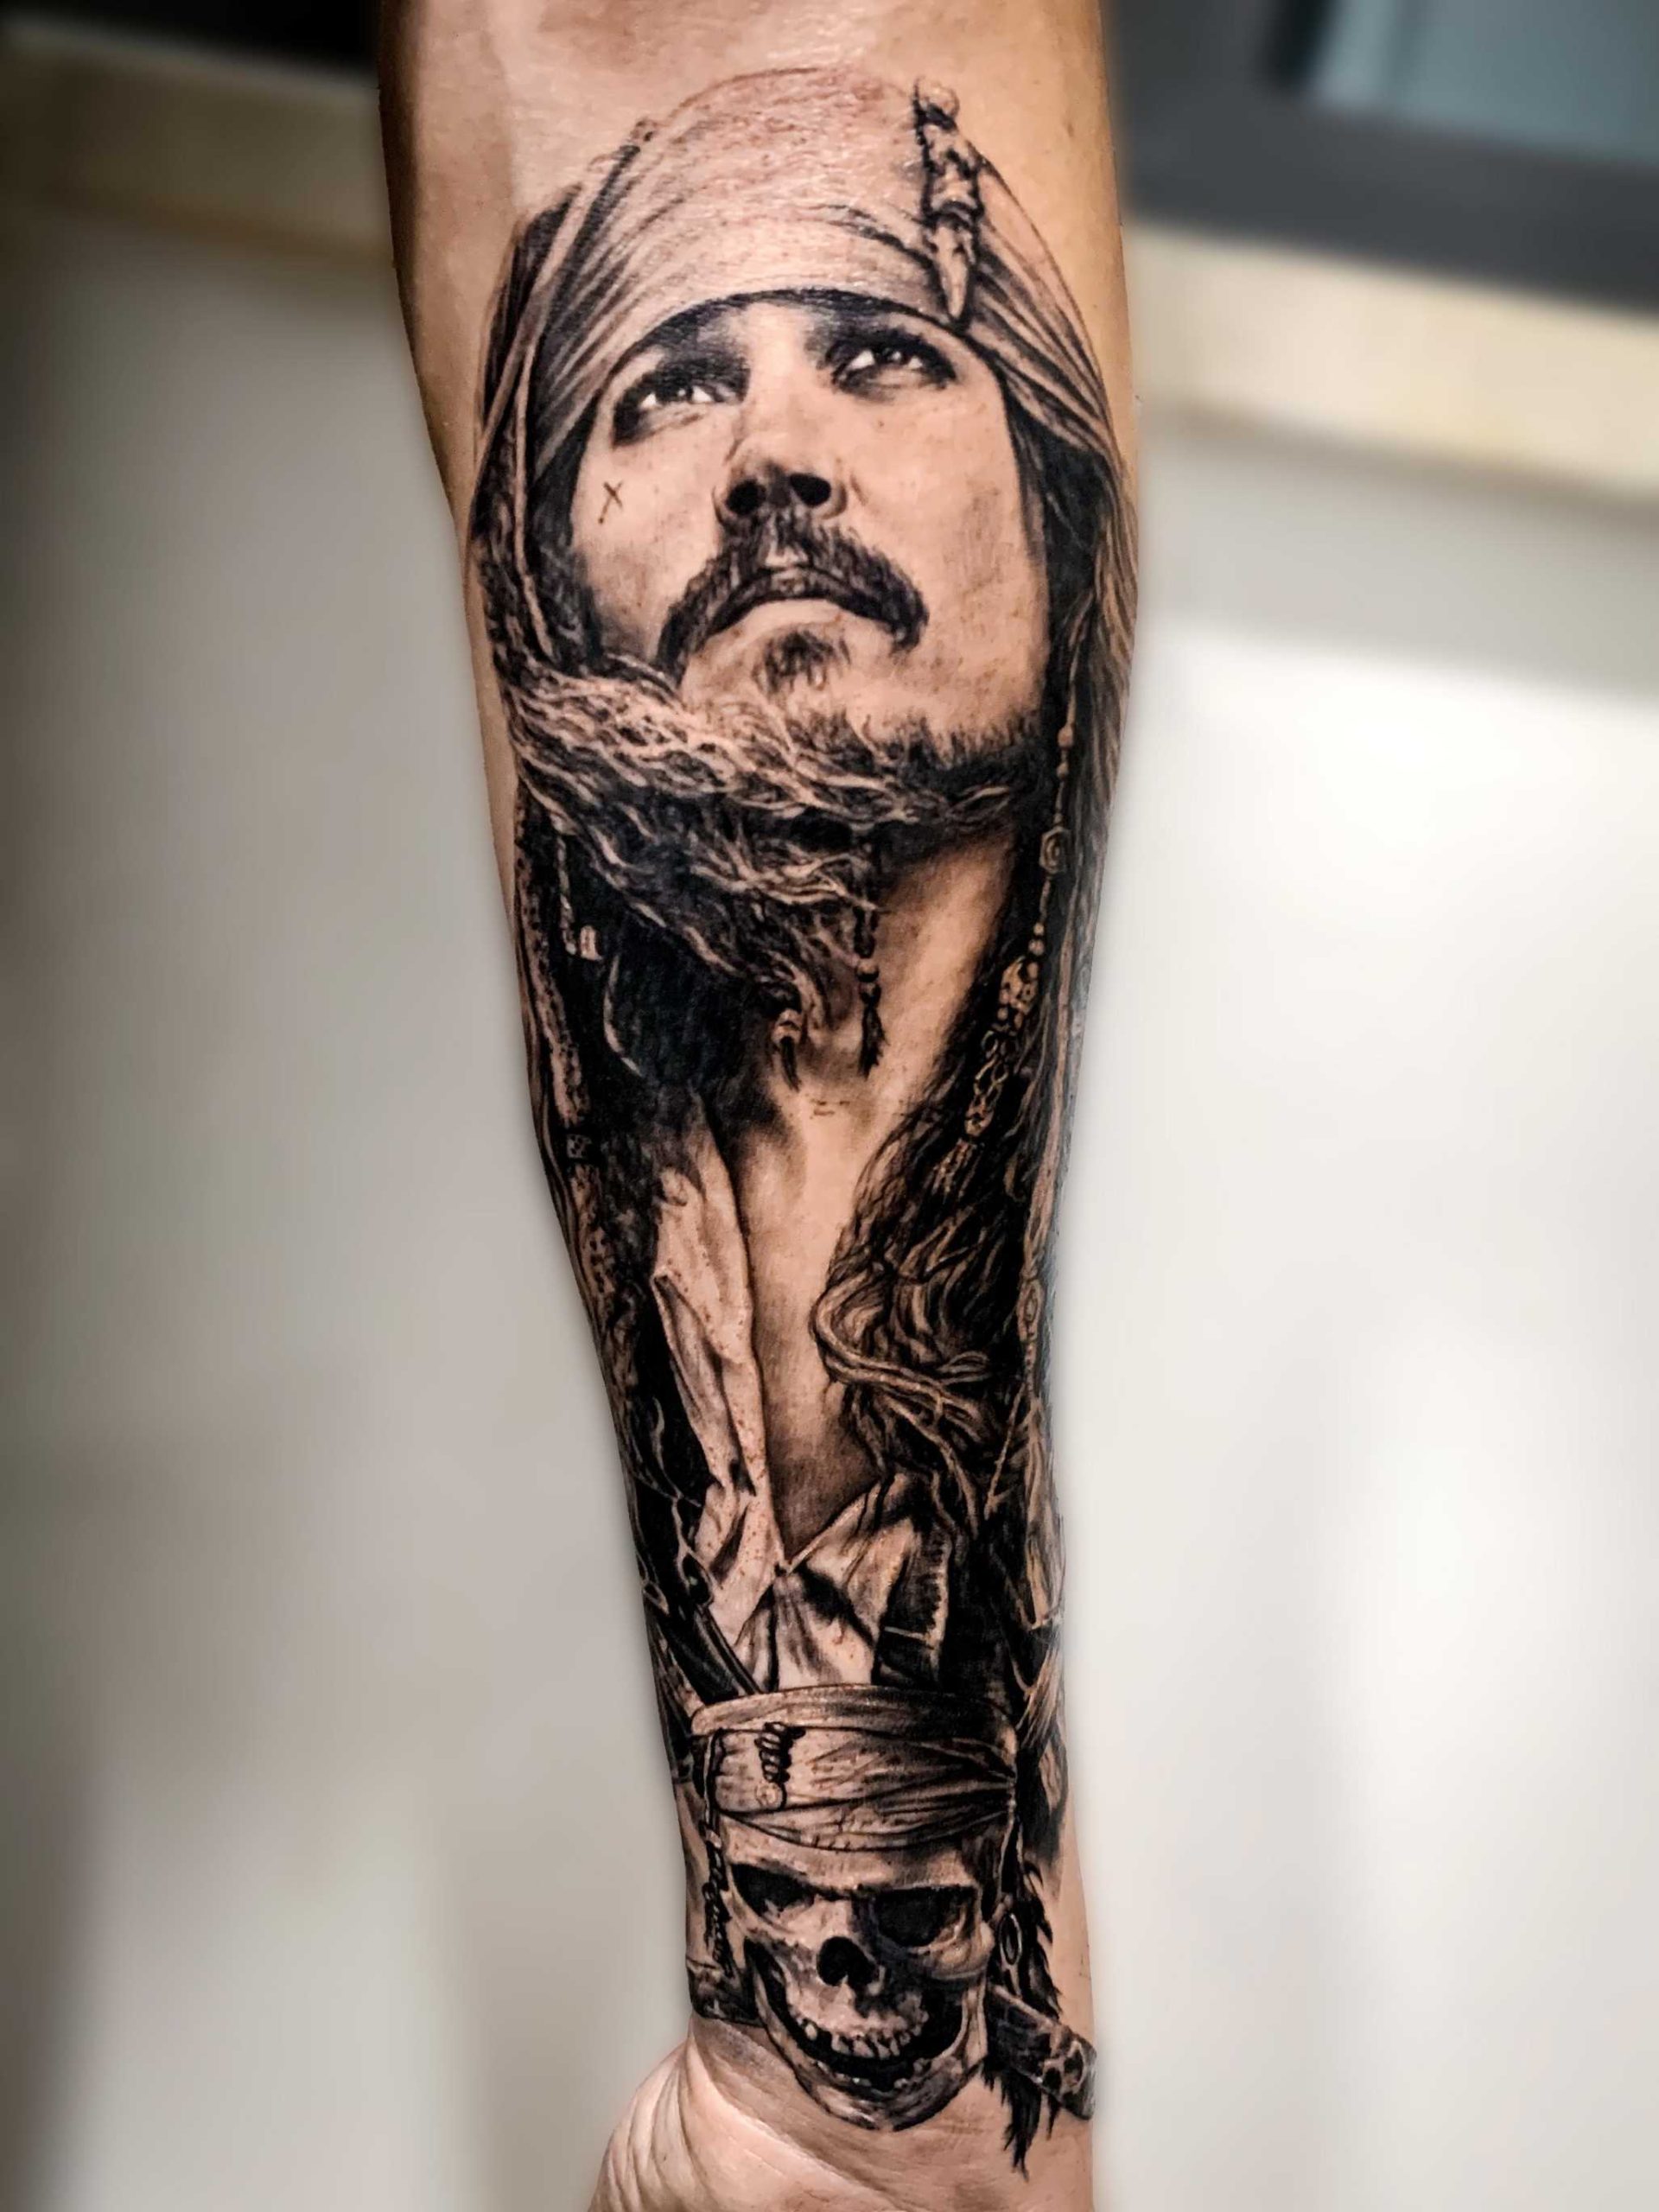 Hey guys, I would love your help to complete my POTC themed tattoo